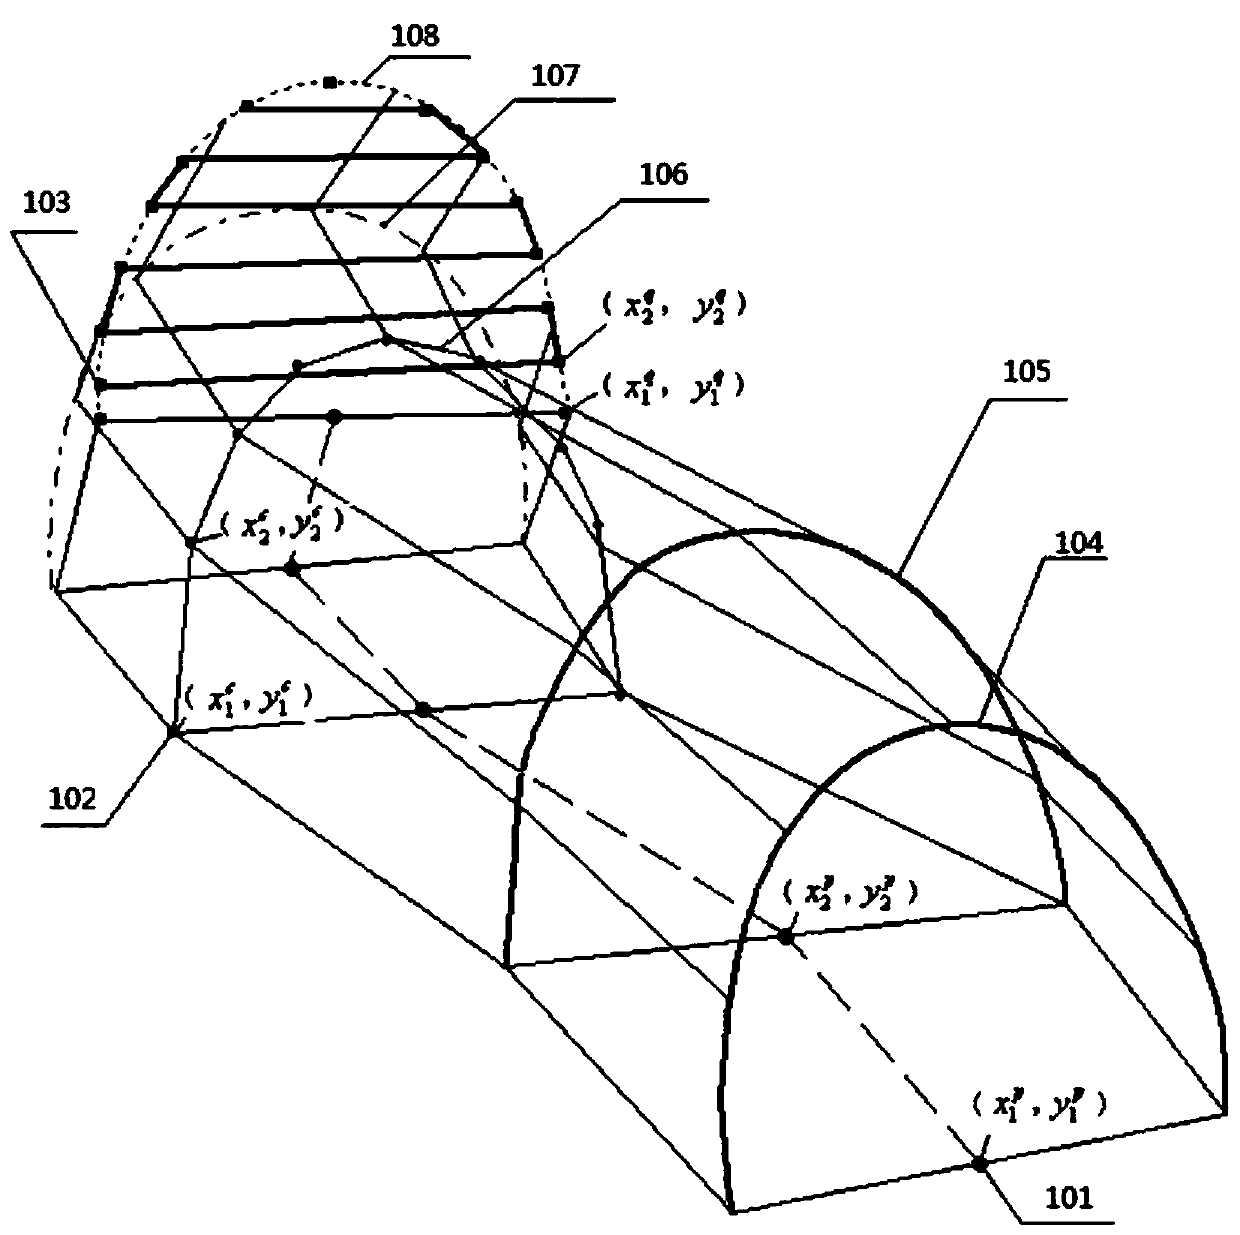 A tunneling method and system for automatic surveying and mapping positioning